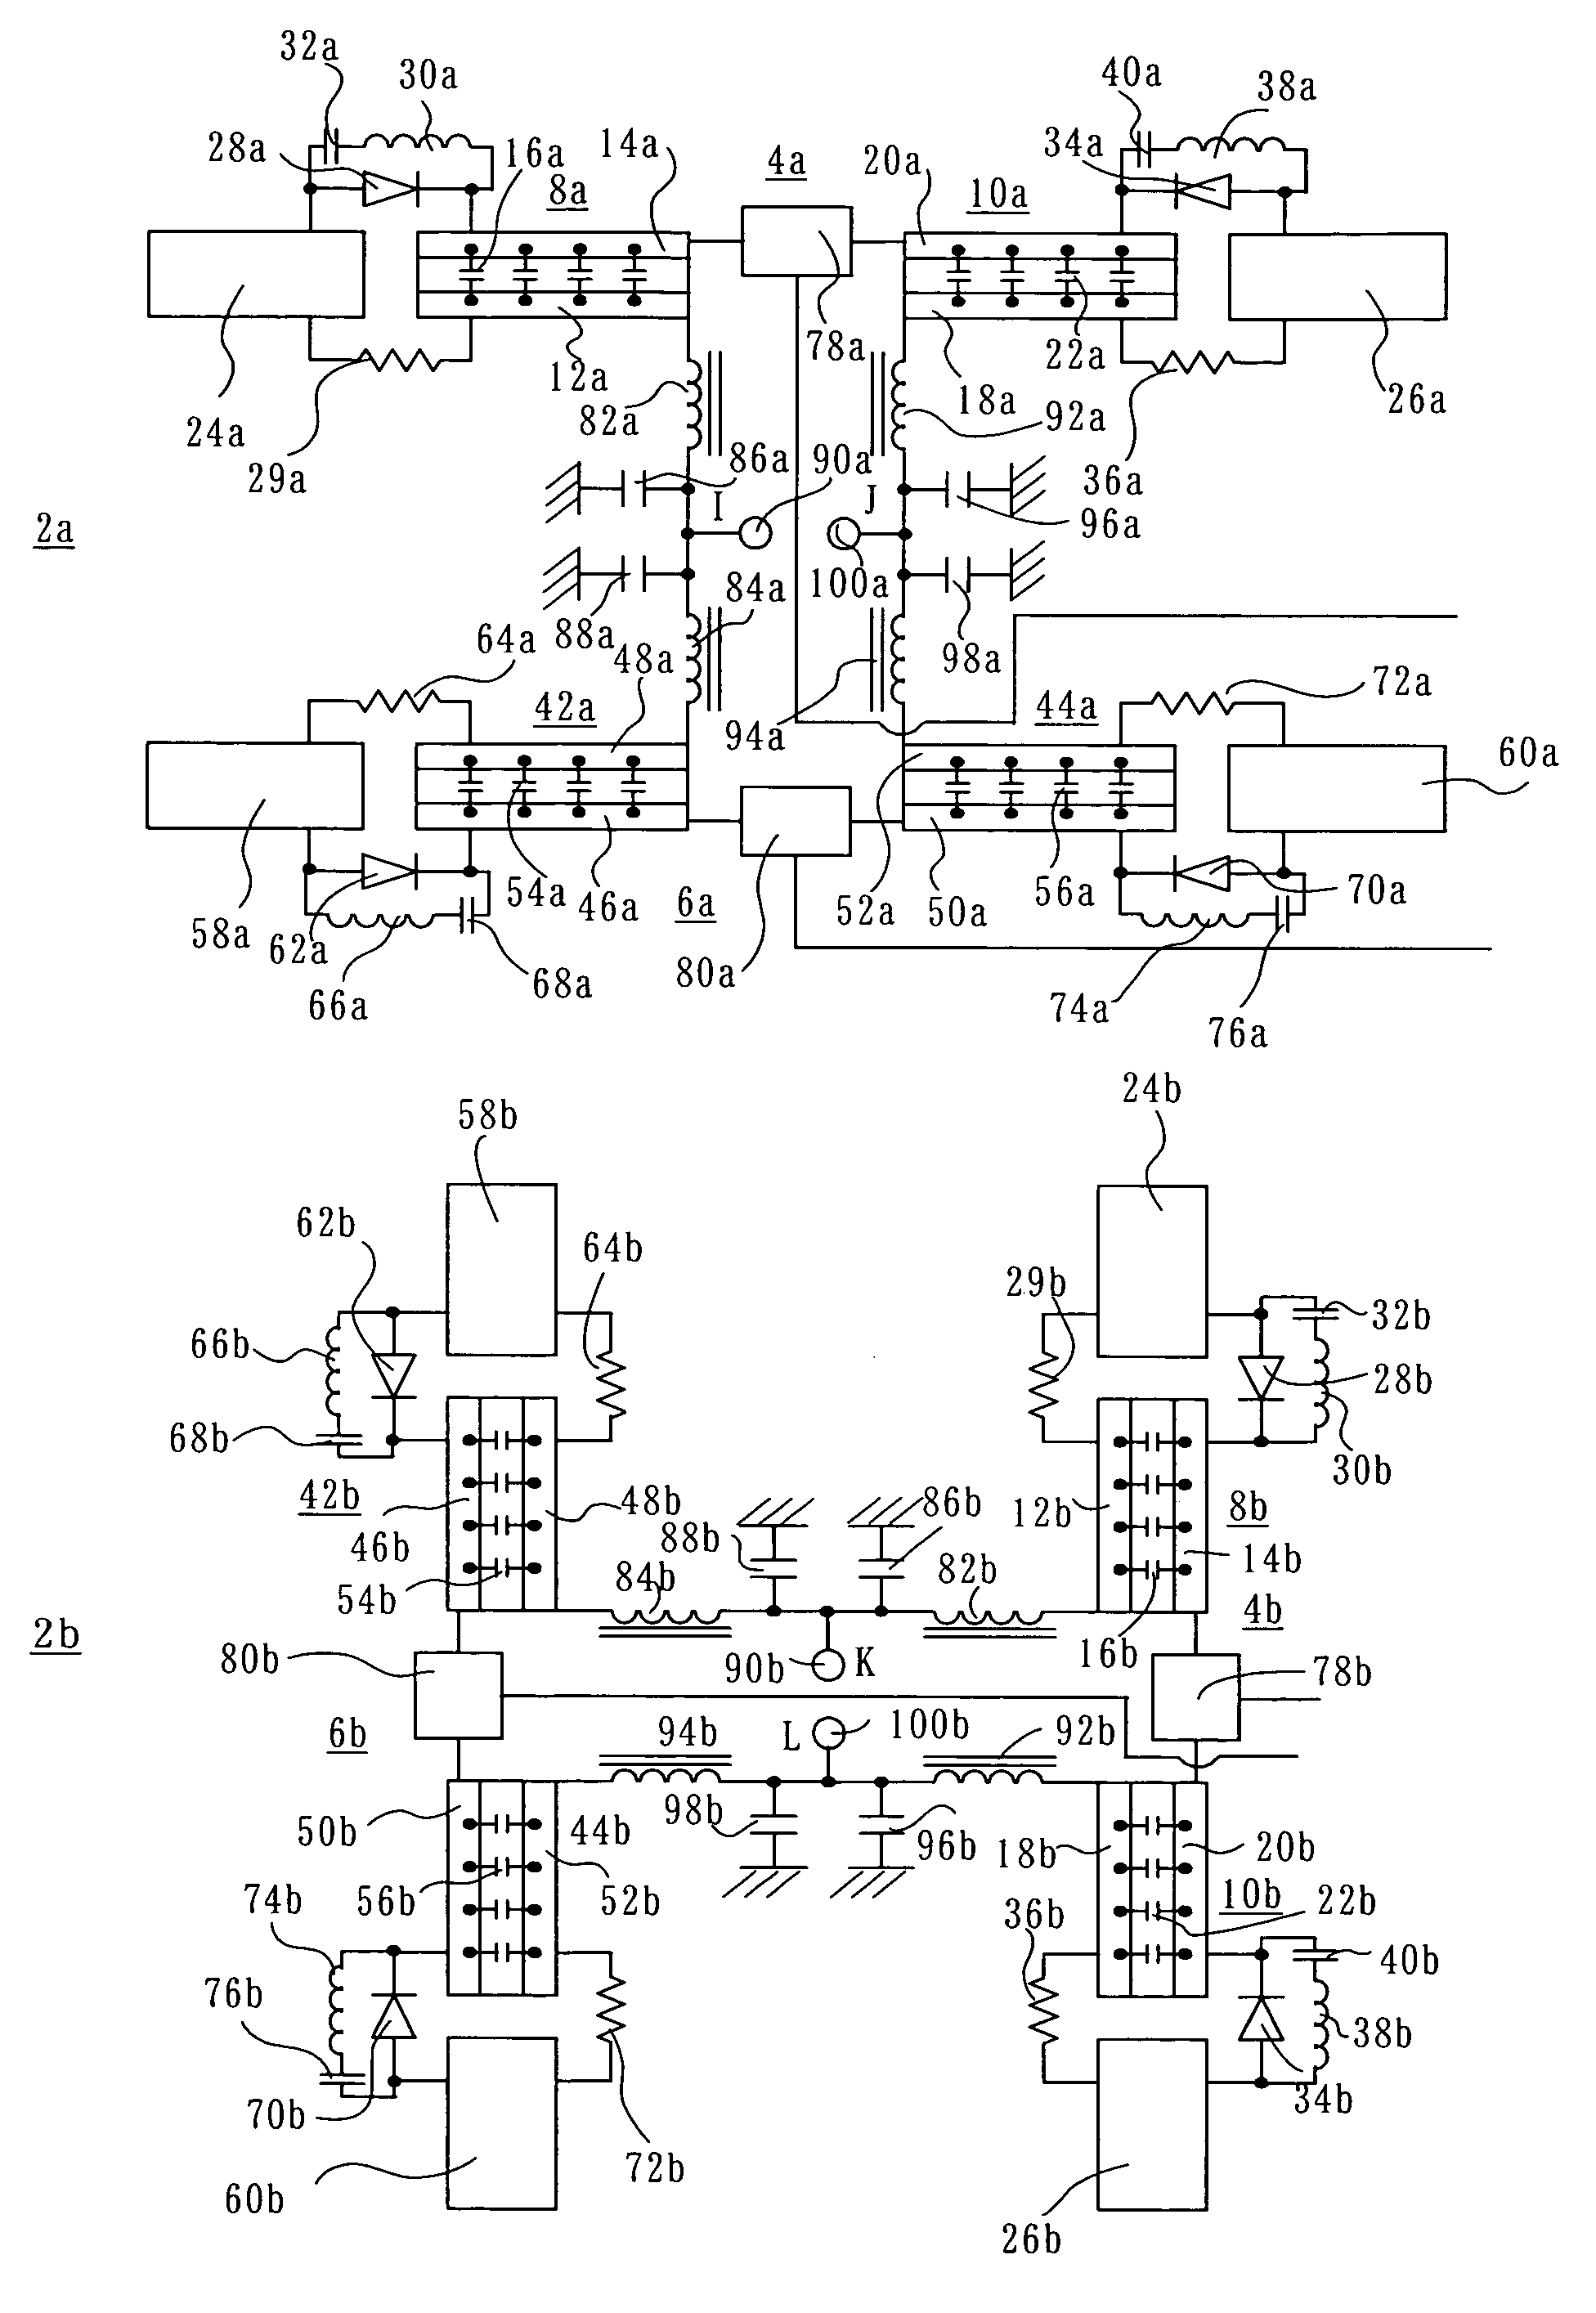 Multiple frequency band antenna and signal receiving system using such antenna